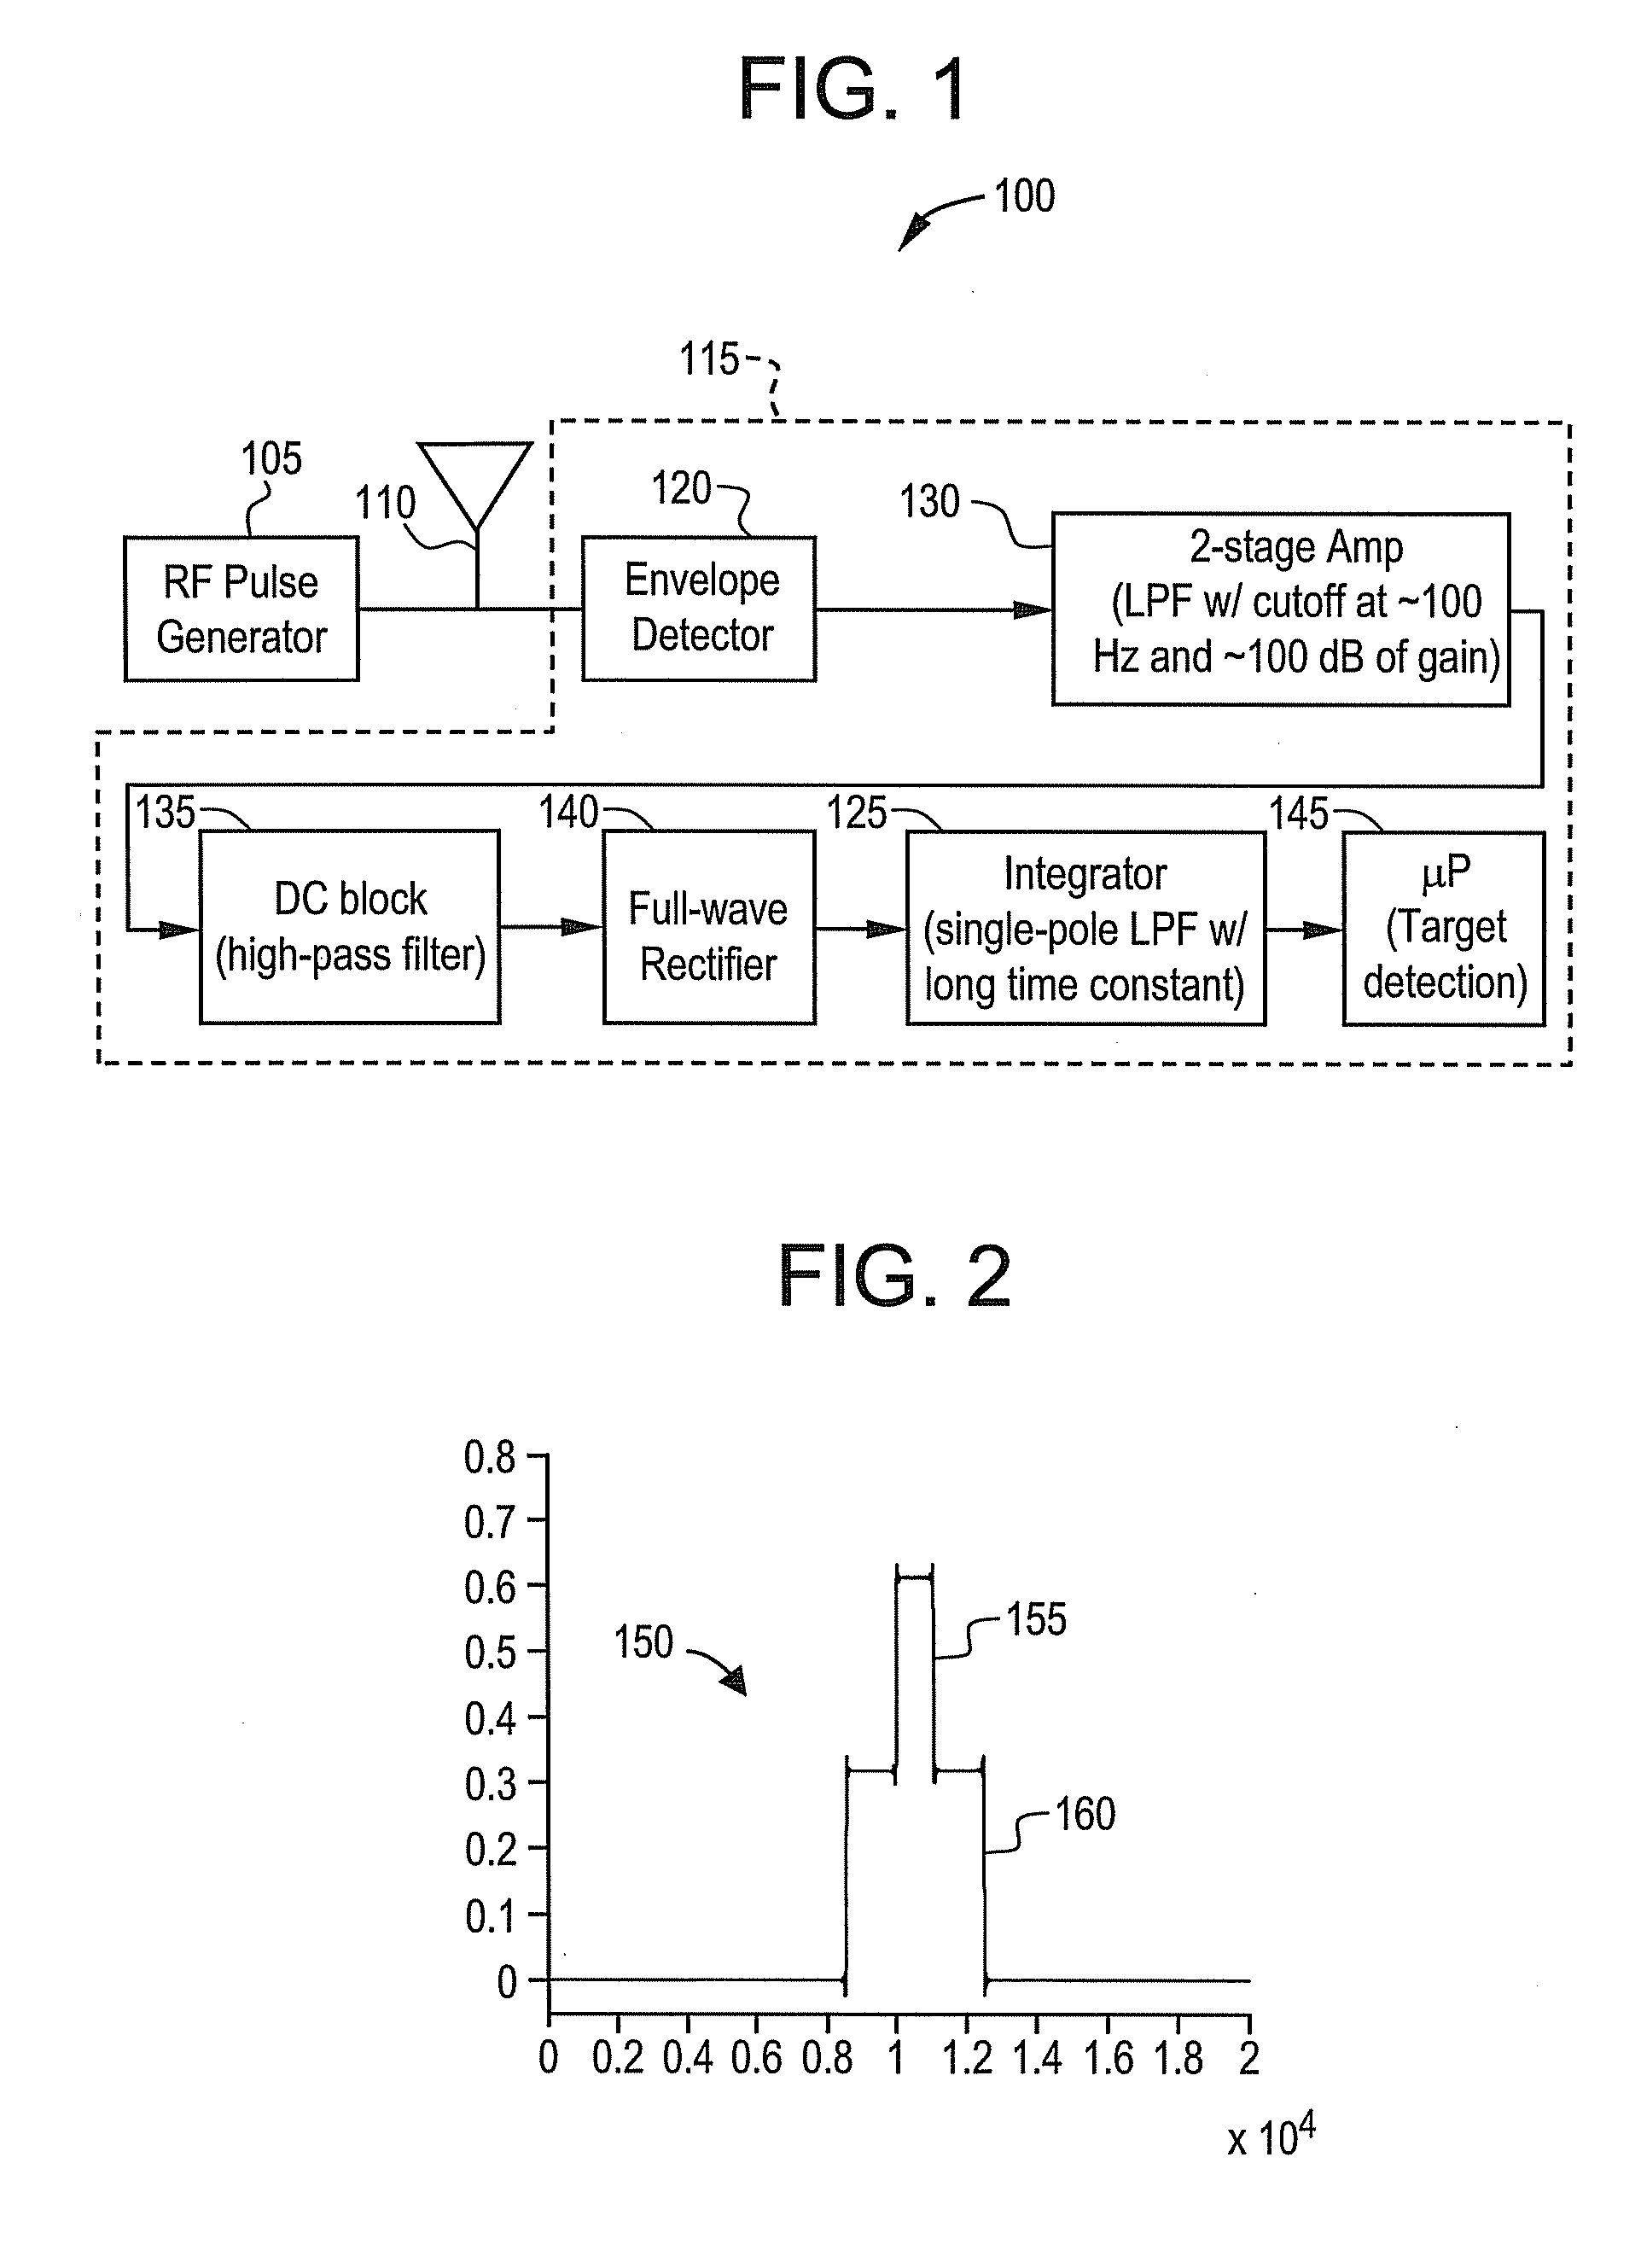 Method and system for radio detection and ranging intrusion detection system